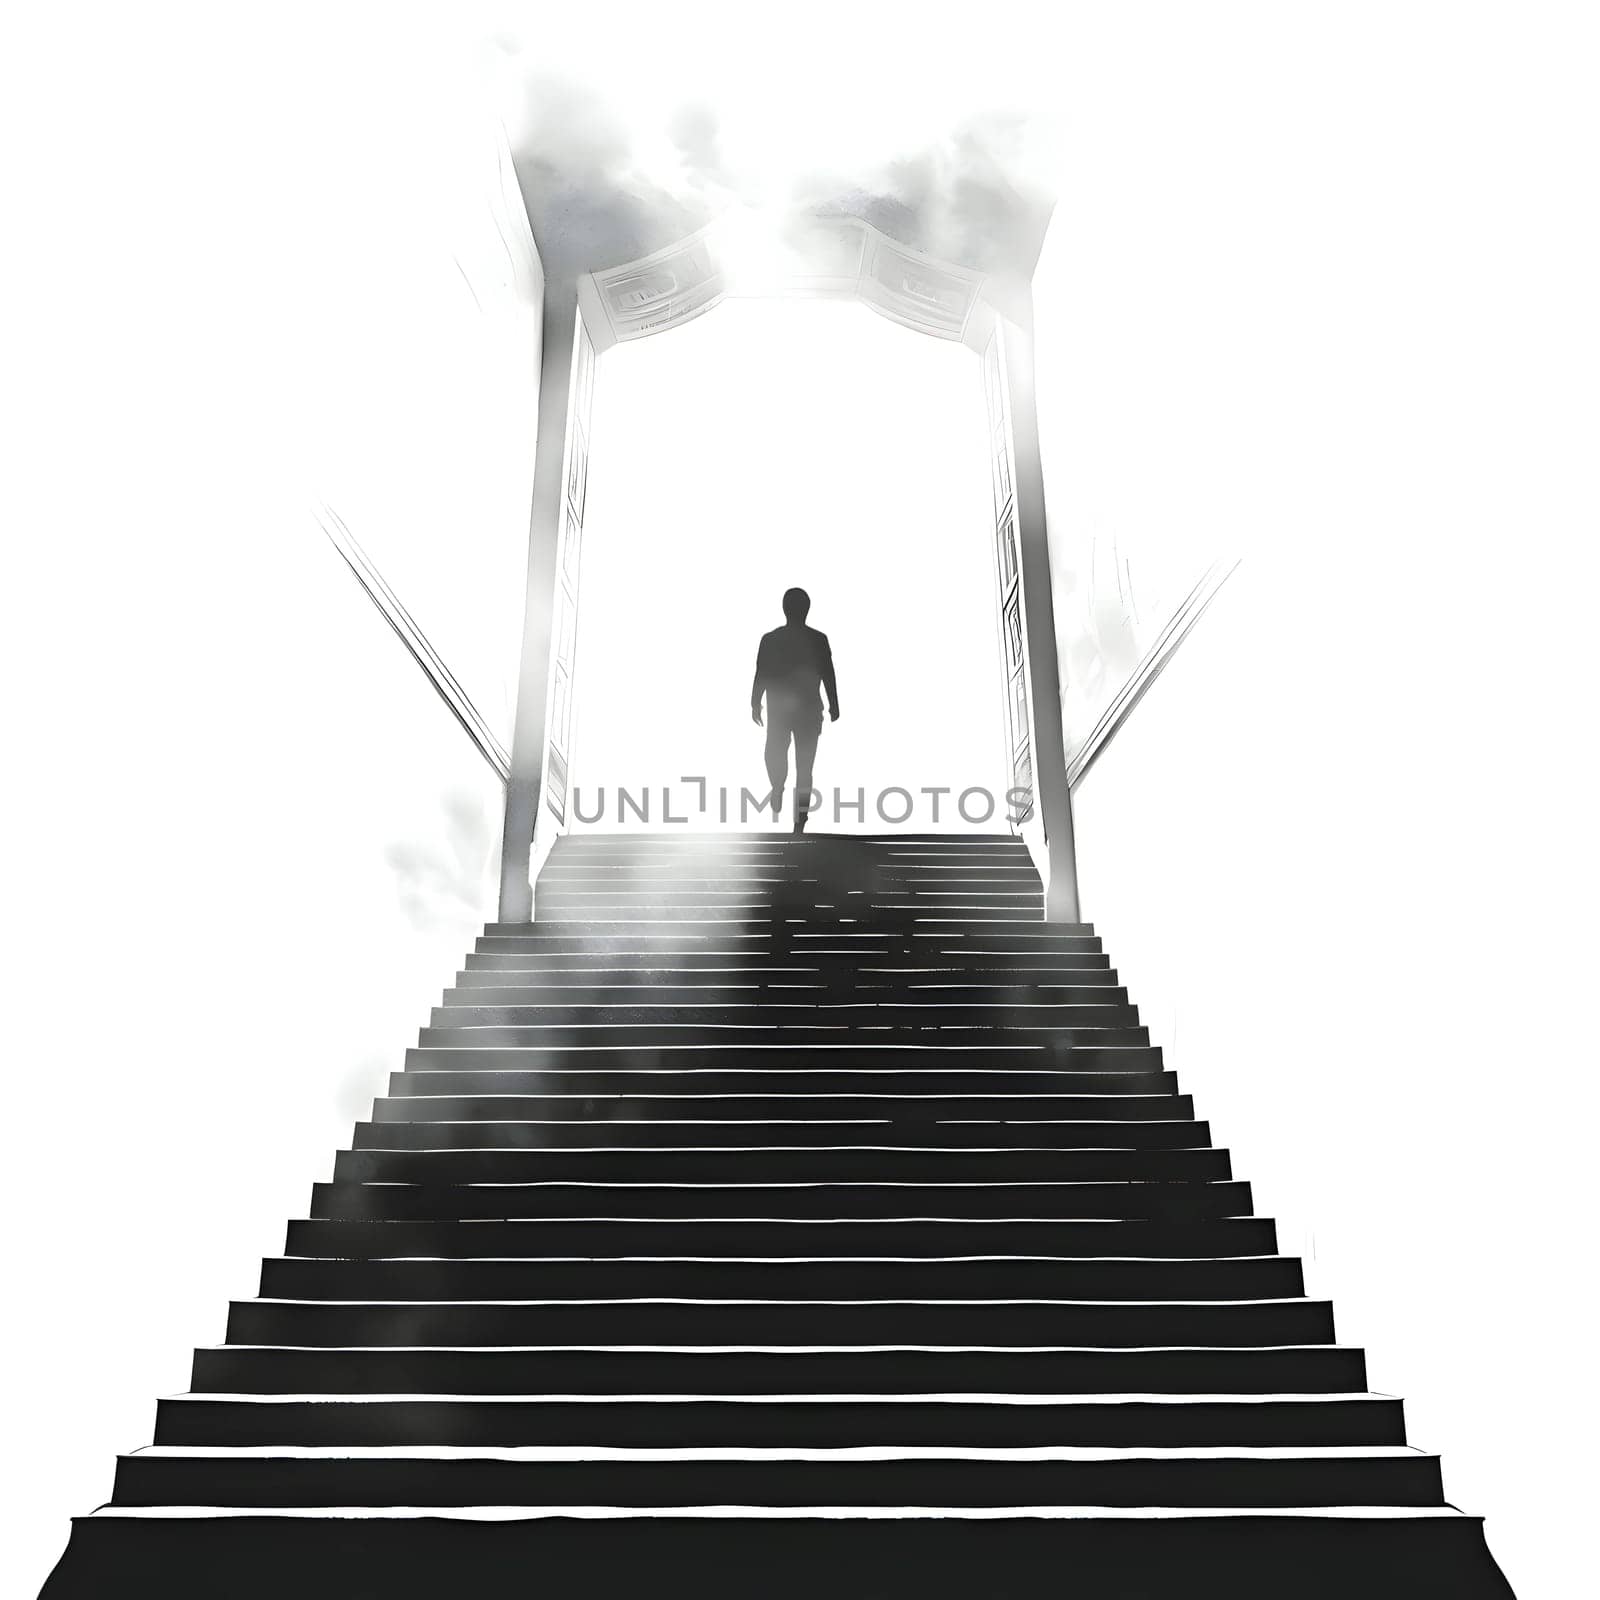 Vector illustration of a man walking on stairs in black silhouette against a clean white background, capturing graceful forms.